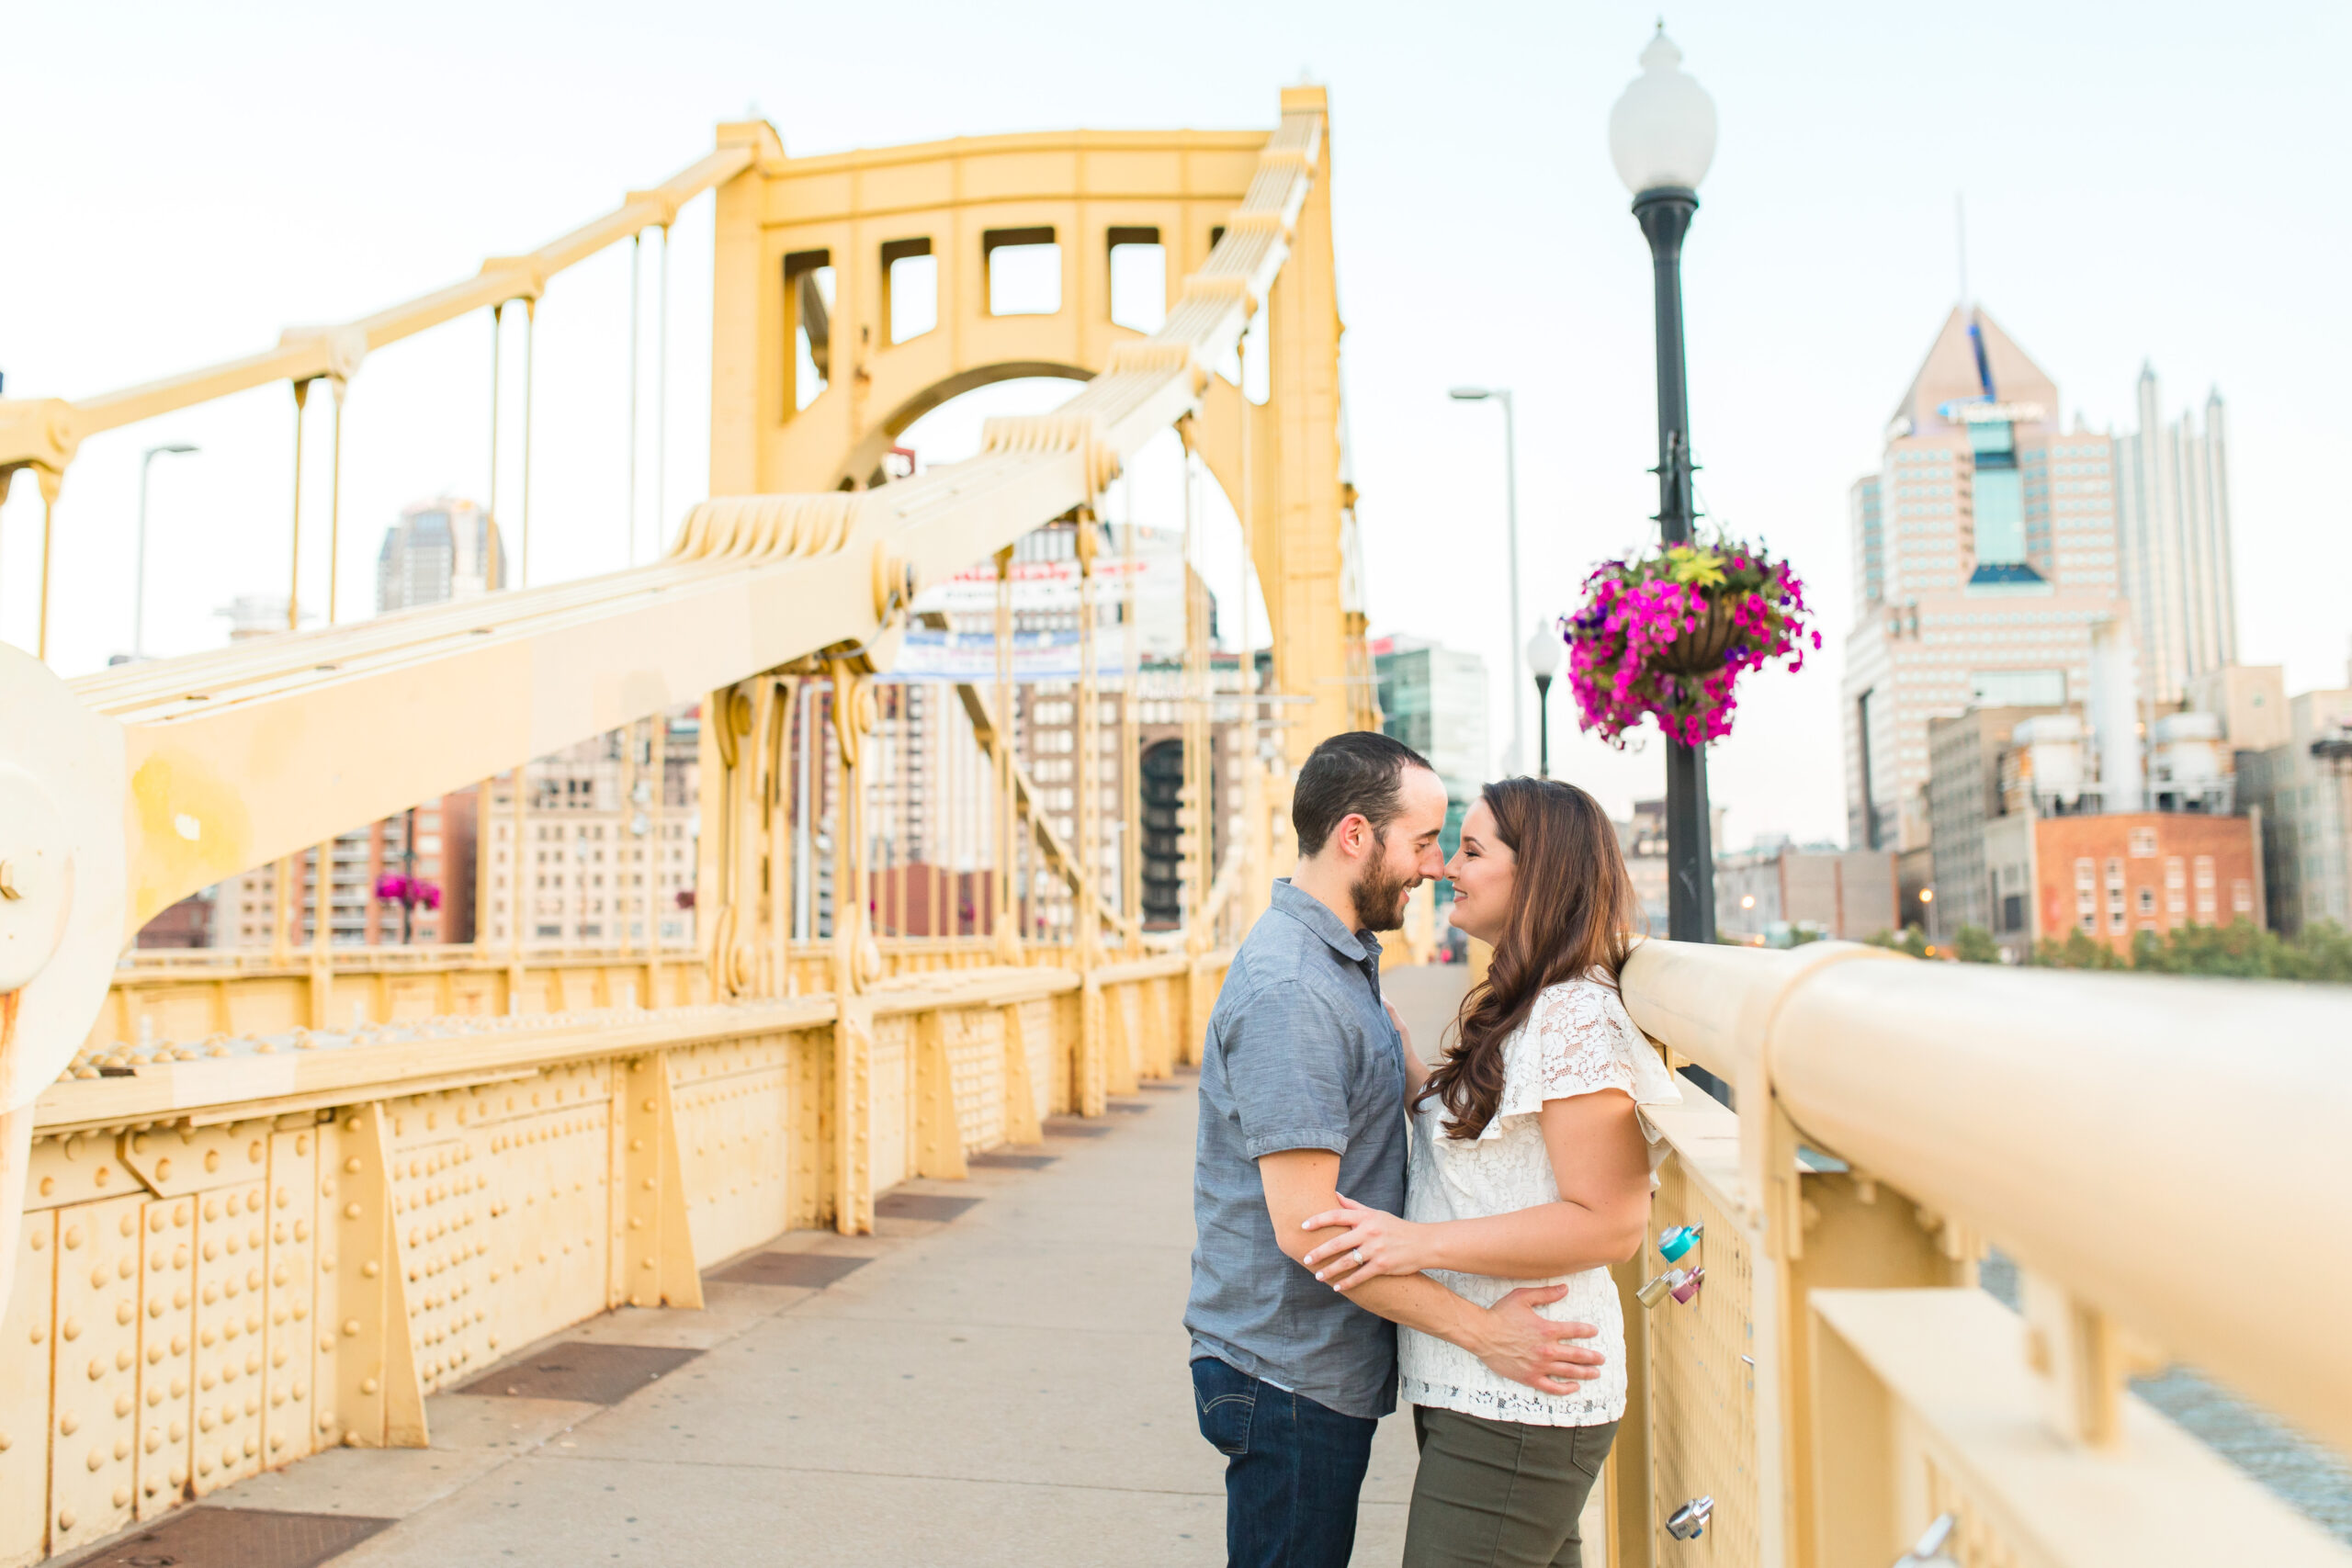 Maternity photo location in Pittsburgh North Shore, featuring a couple on a yellow bridge.